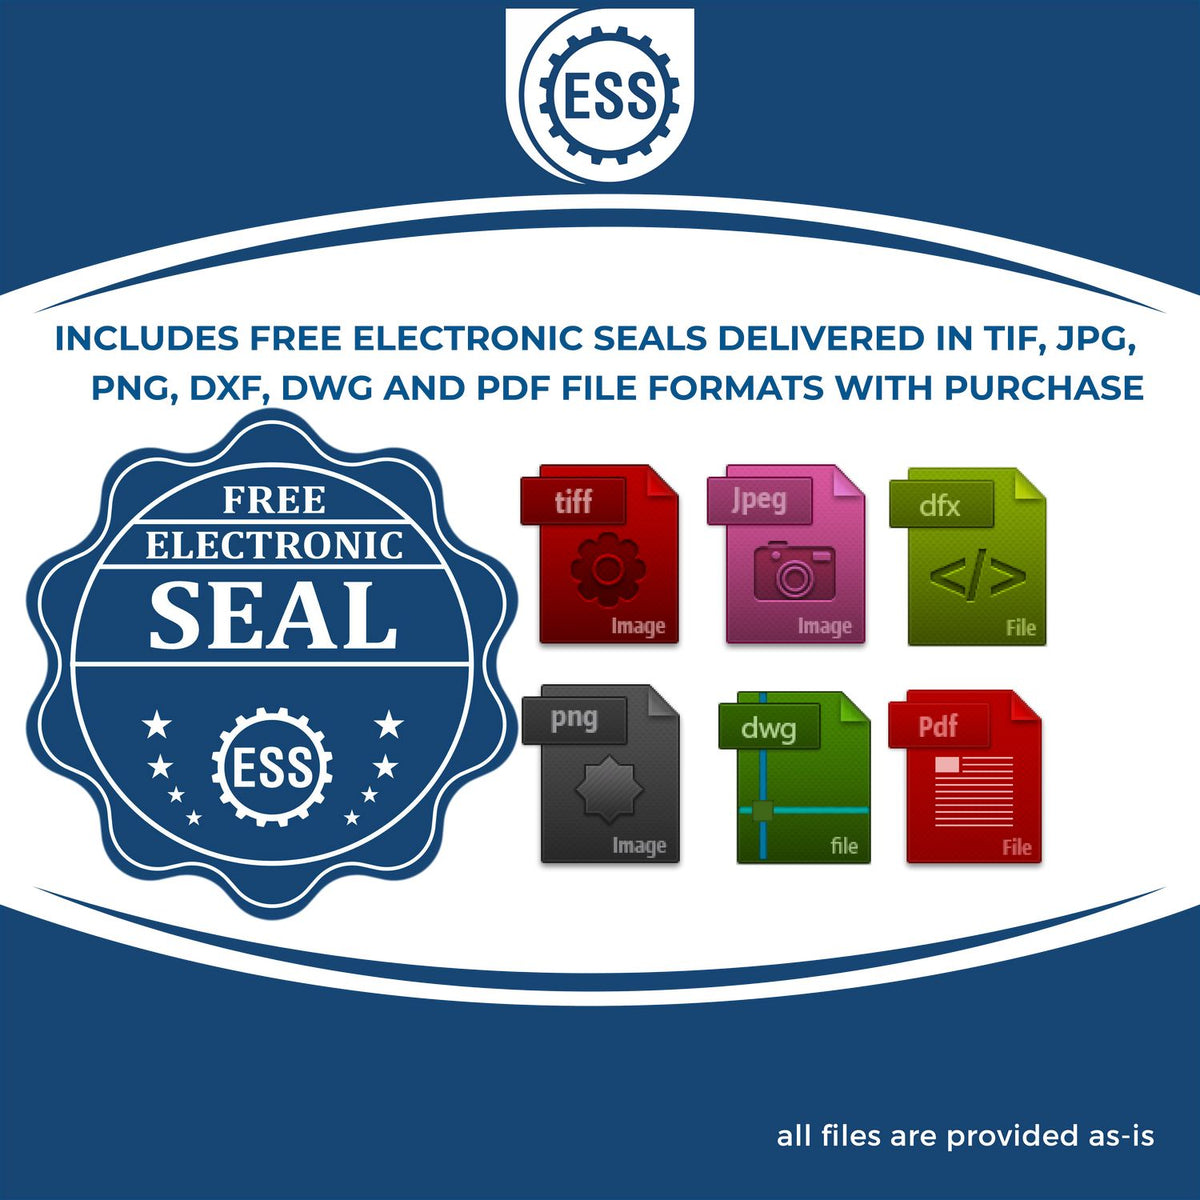 An infographic for the free electronic seal for the Texas Engineer Desk Seal illustrating the different file type icons such as DXF, DWG, TIF, JPG and PNG.